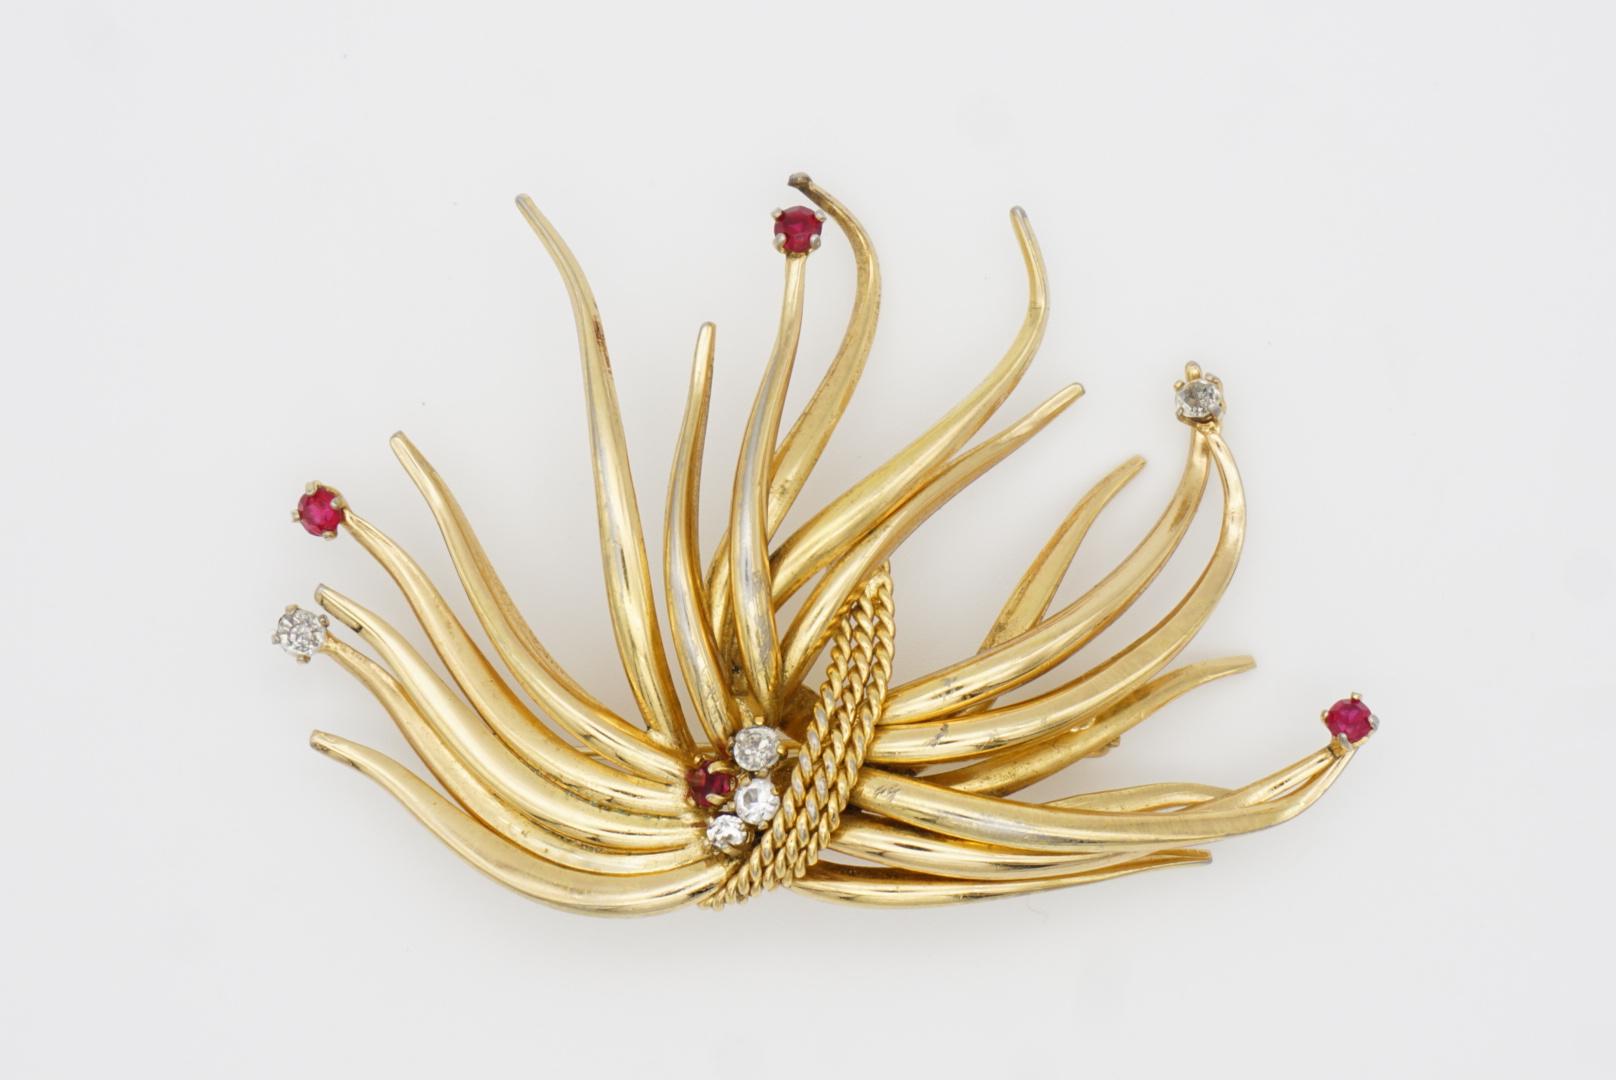 Christian Dior GROSSE 1962 Vintage Large Intertwined Flower Ruby Crystals Brooch For Sale 3